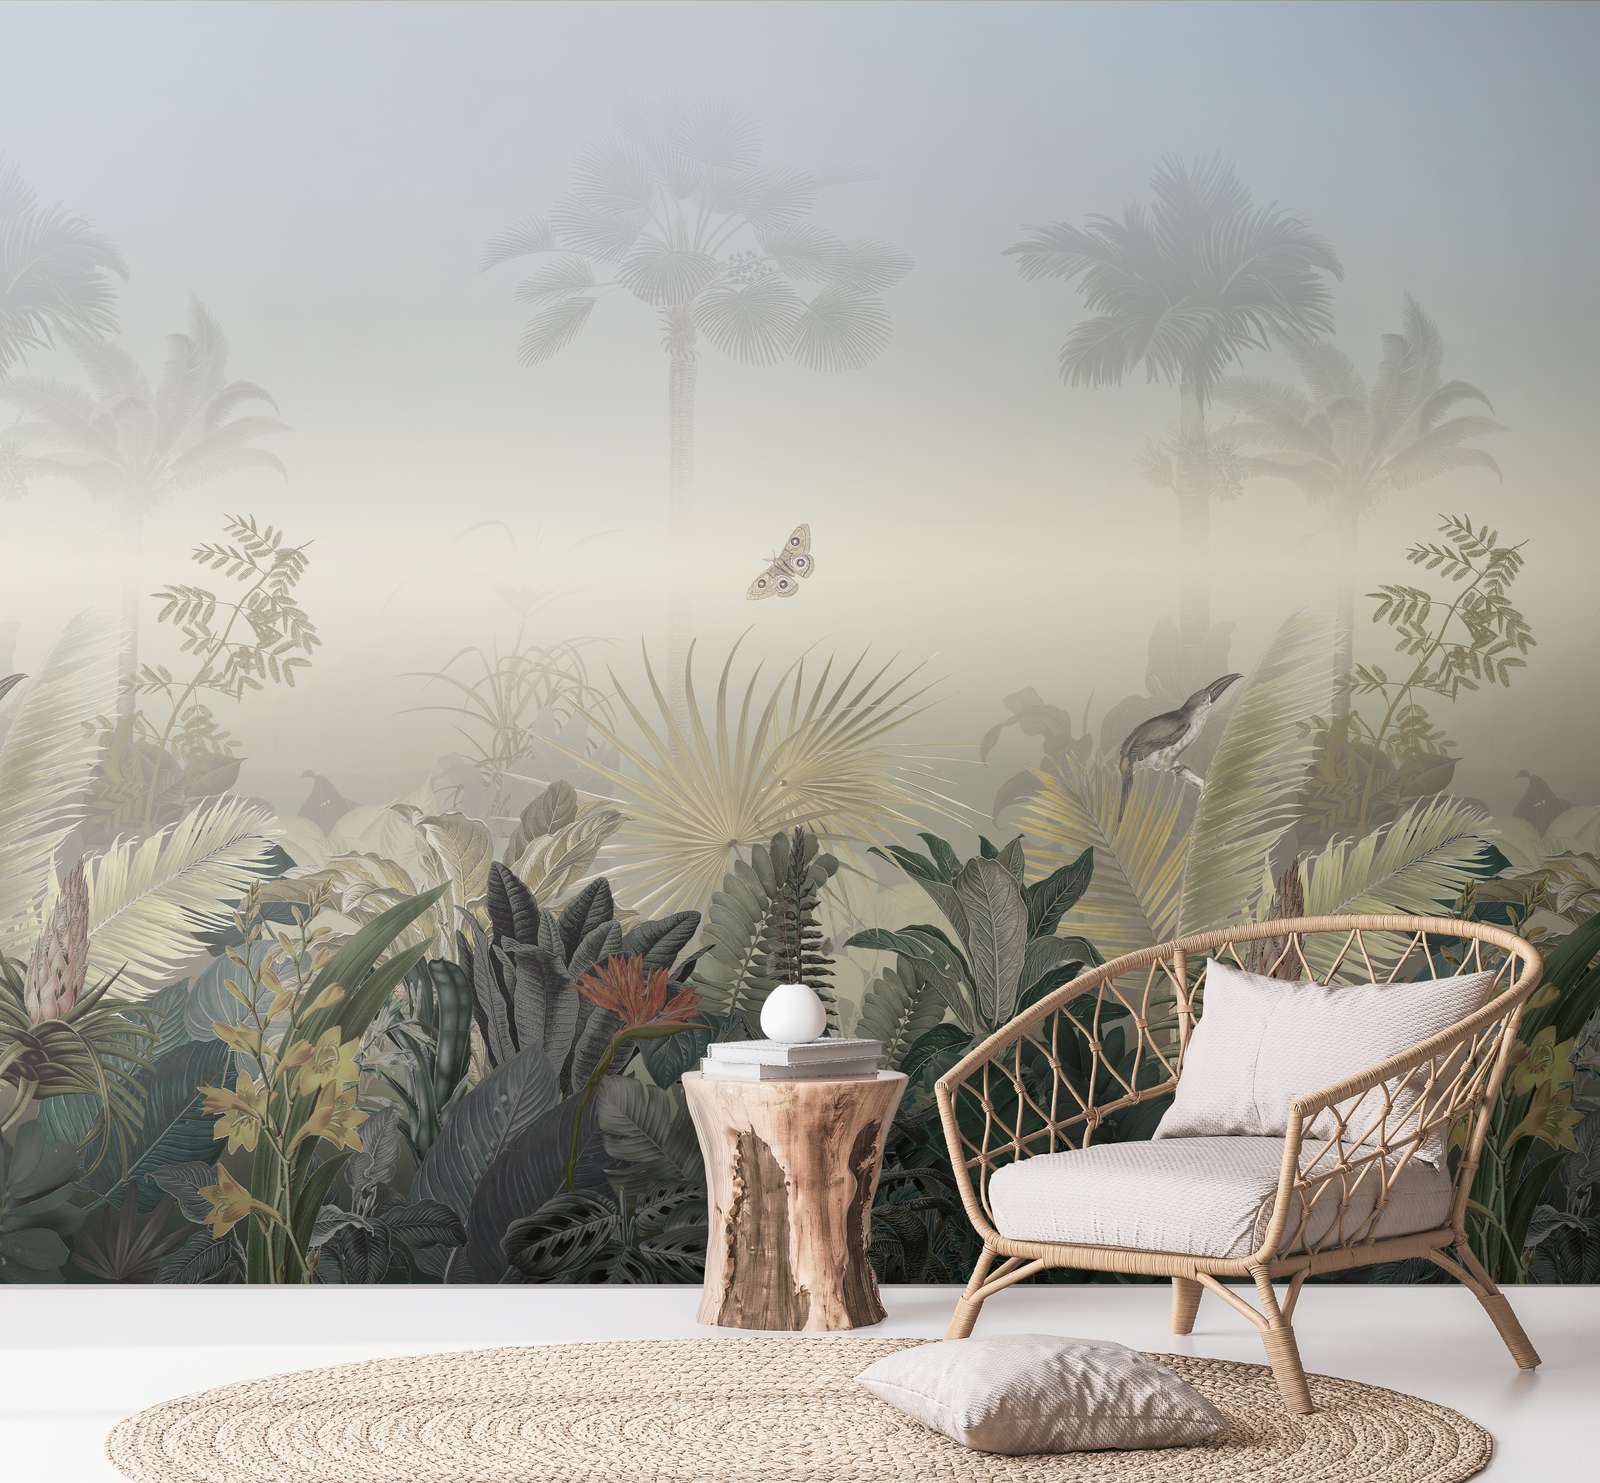             Jungle motif wallpaper with animals in the mist - colourful, blue, green
        